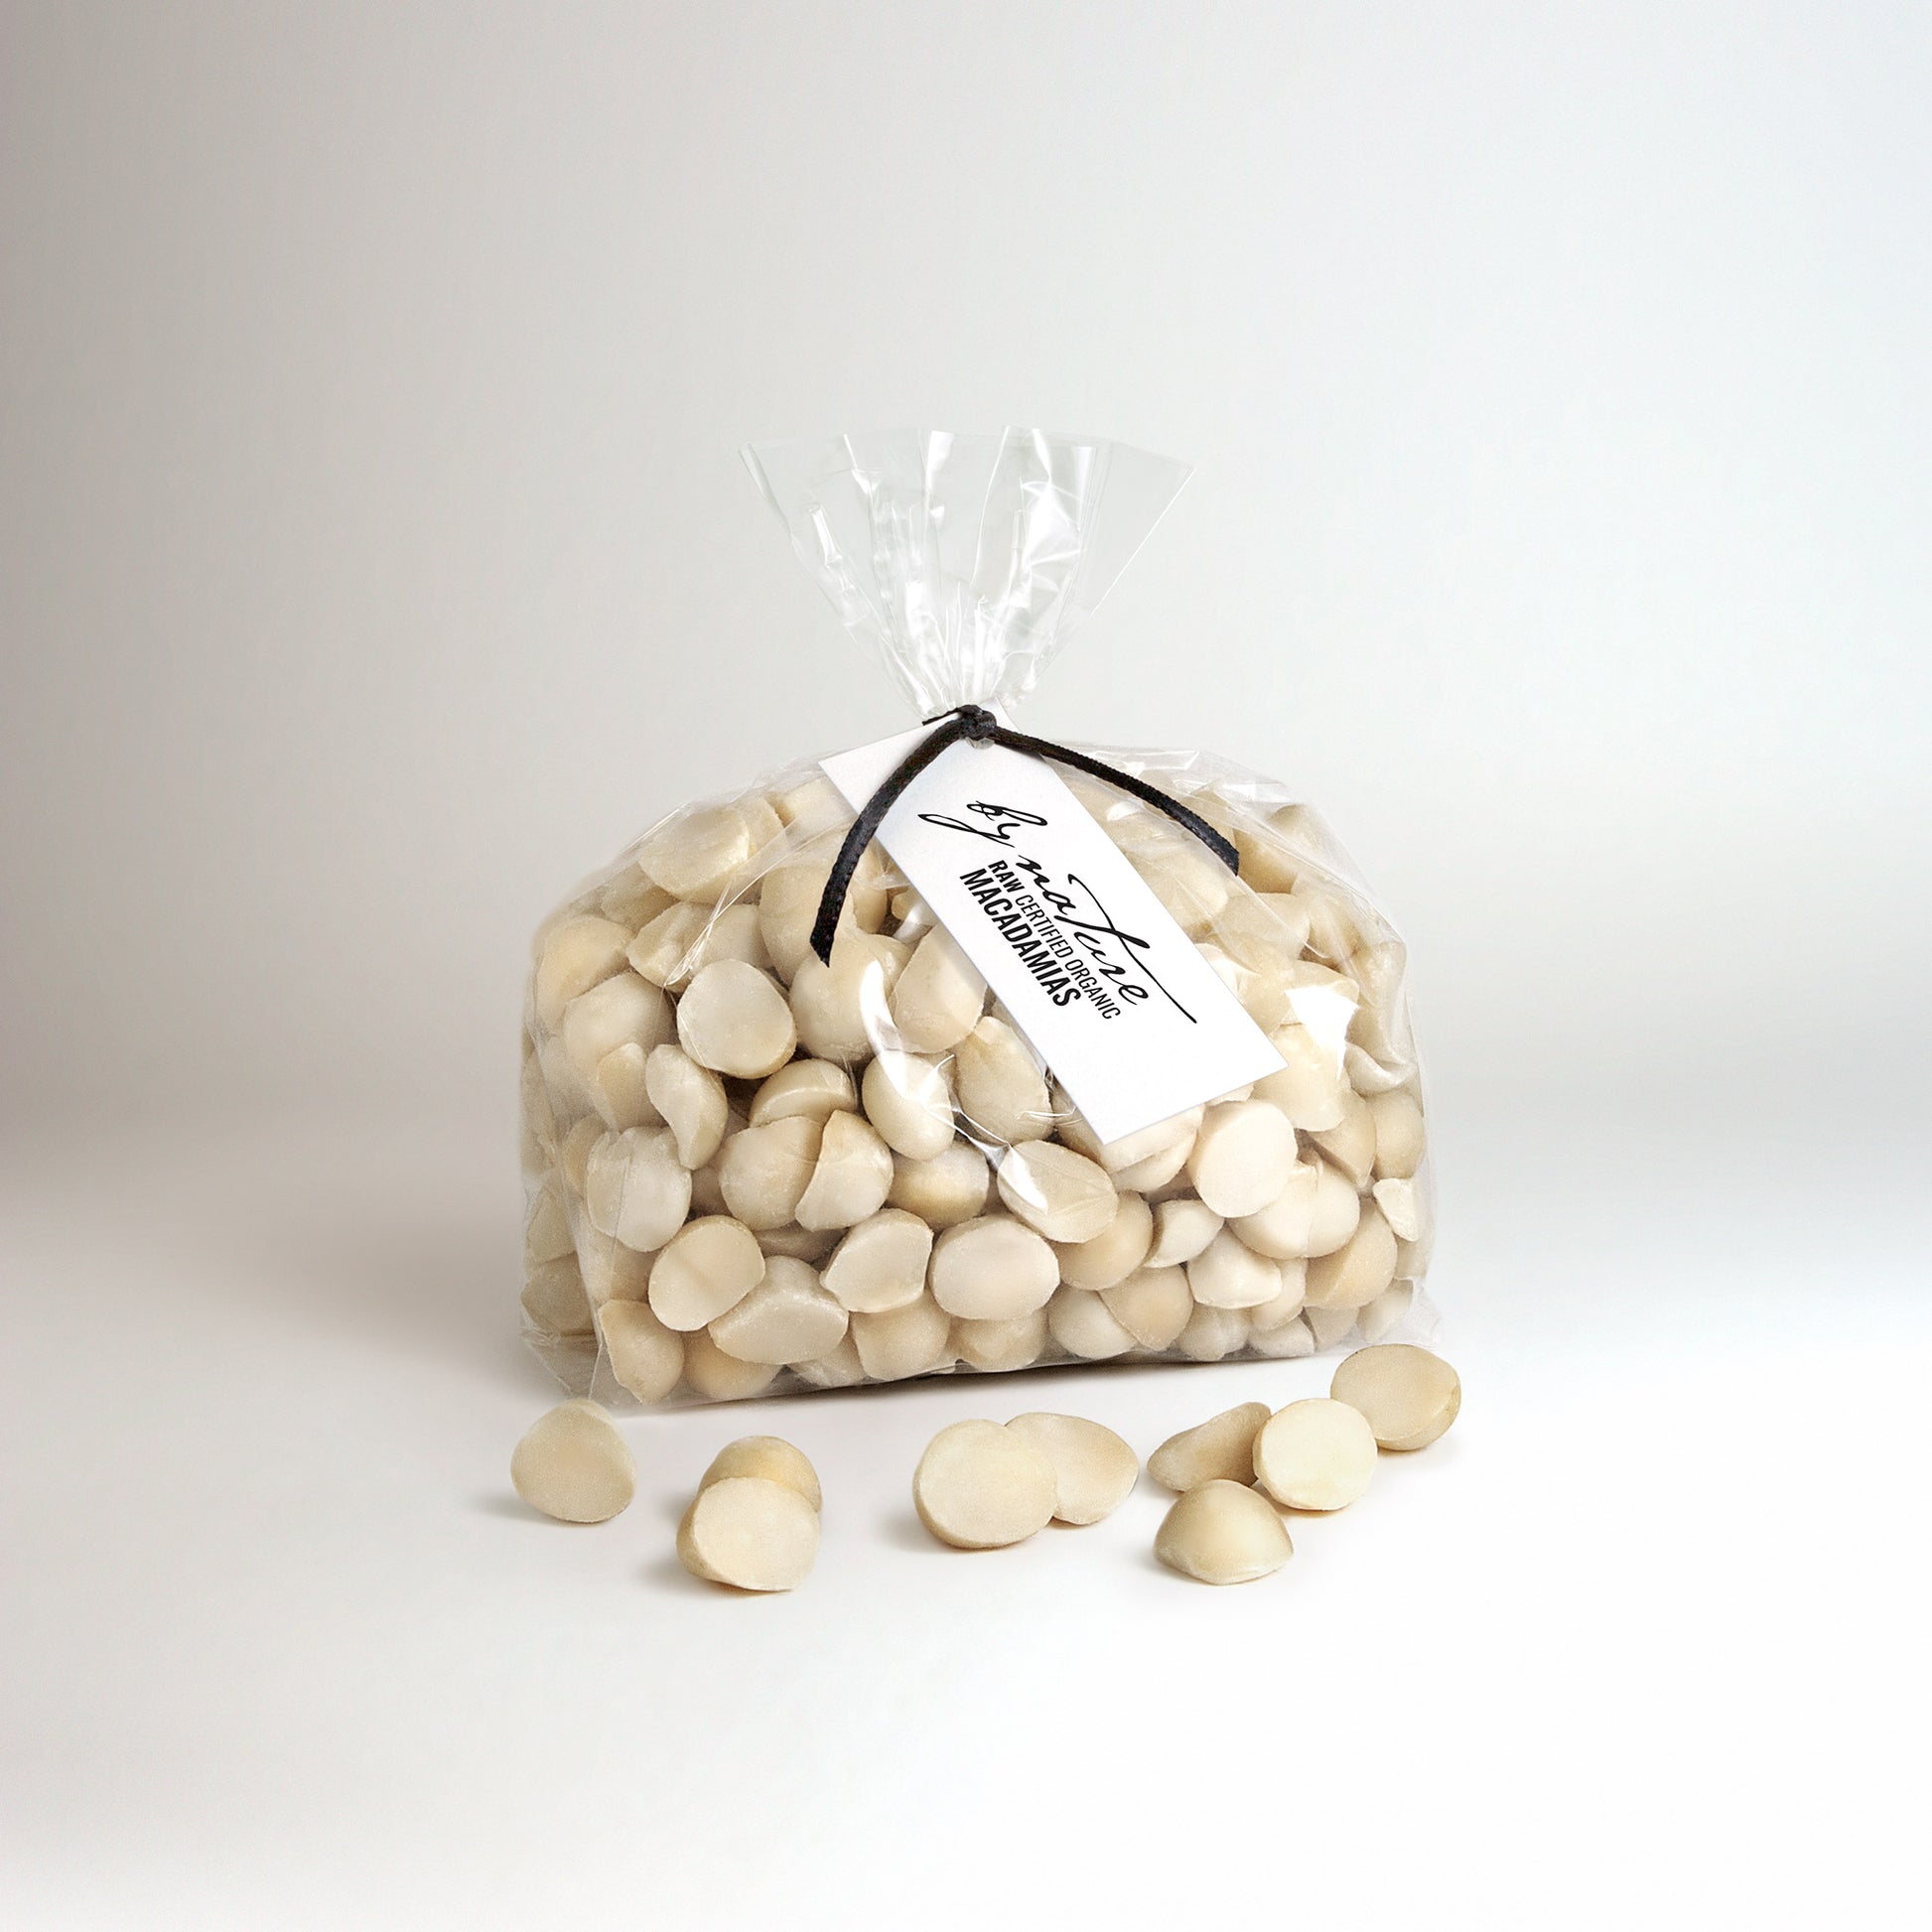 BY NATURE Macadamia Nuts, 500g - certified organic at source, raw.